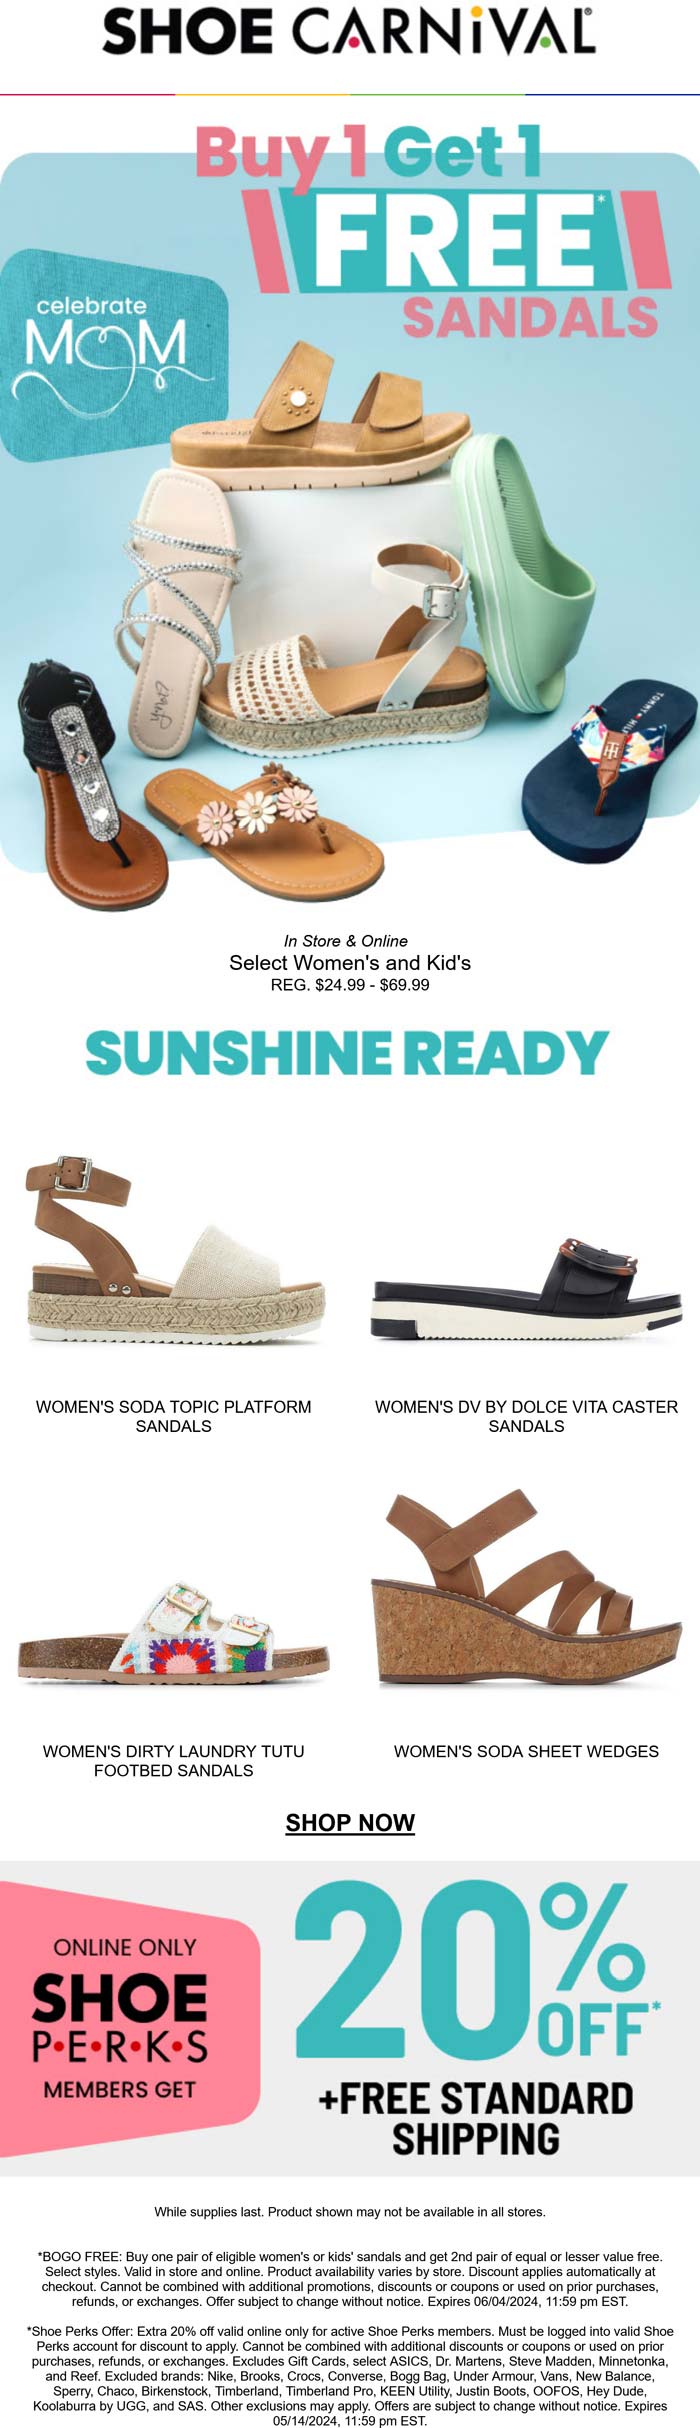 Shoe Carnival stores Coupon  Second sandals free at Shoe Carnival ditto online #shoecarnival 